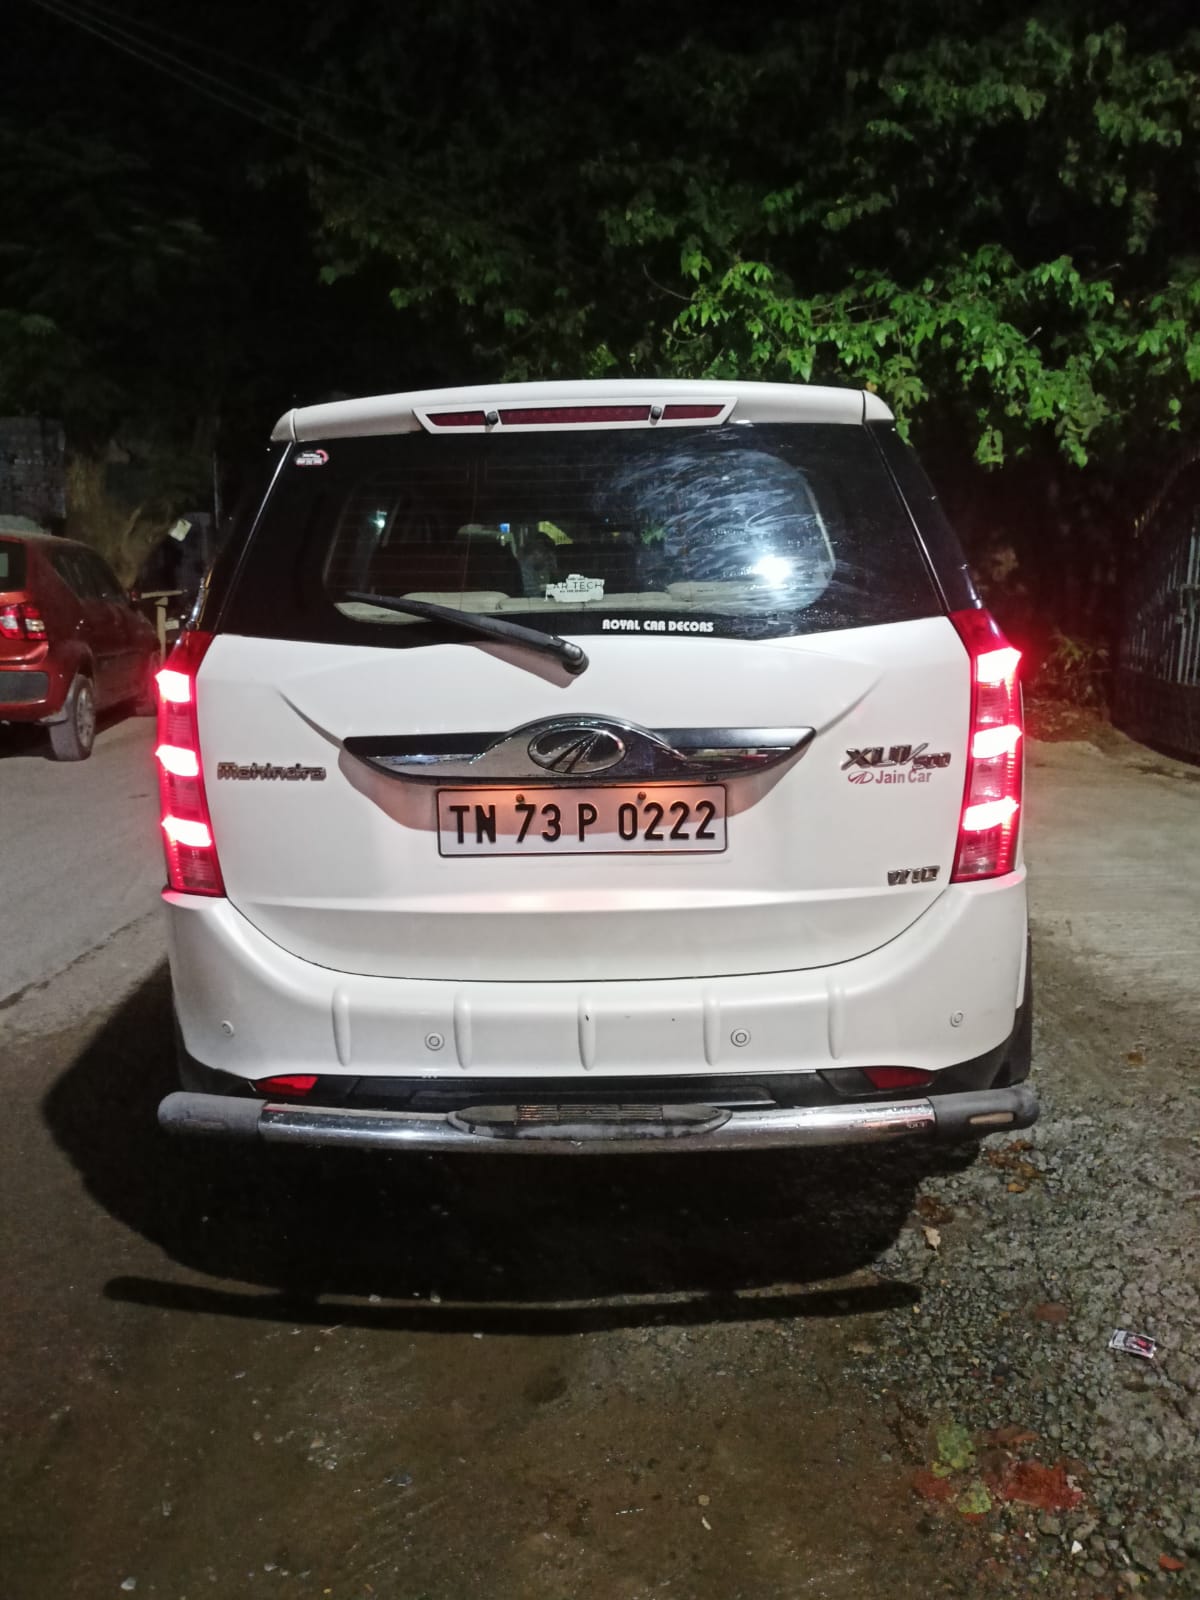 4650-for-sale-Mahindra-XUV-500-Diesel-First-Owner-2017-TN-registered-rs-1180000